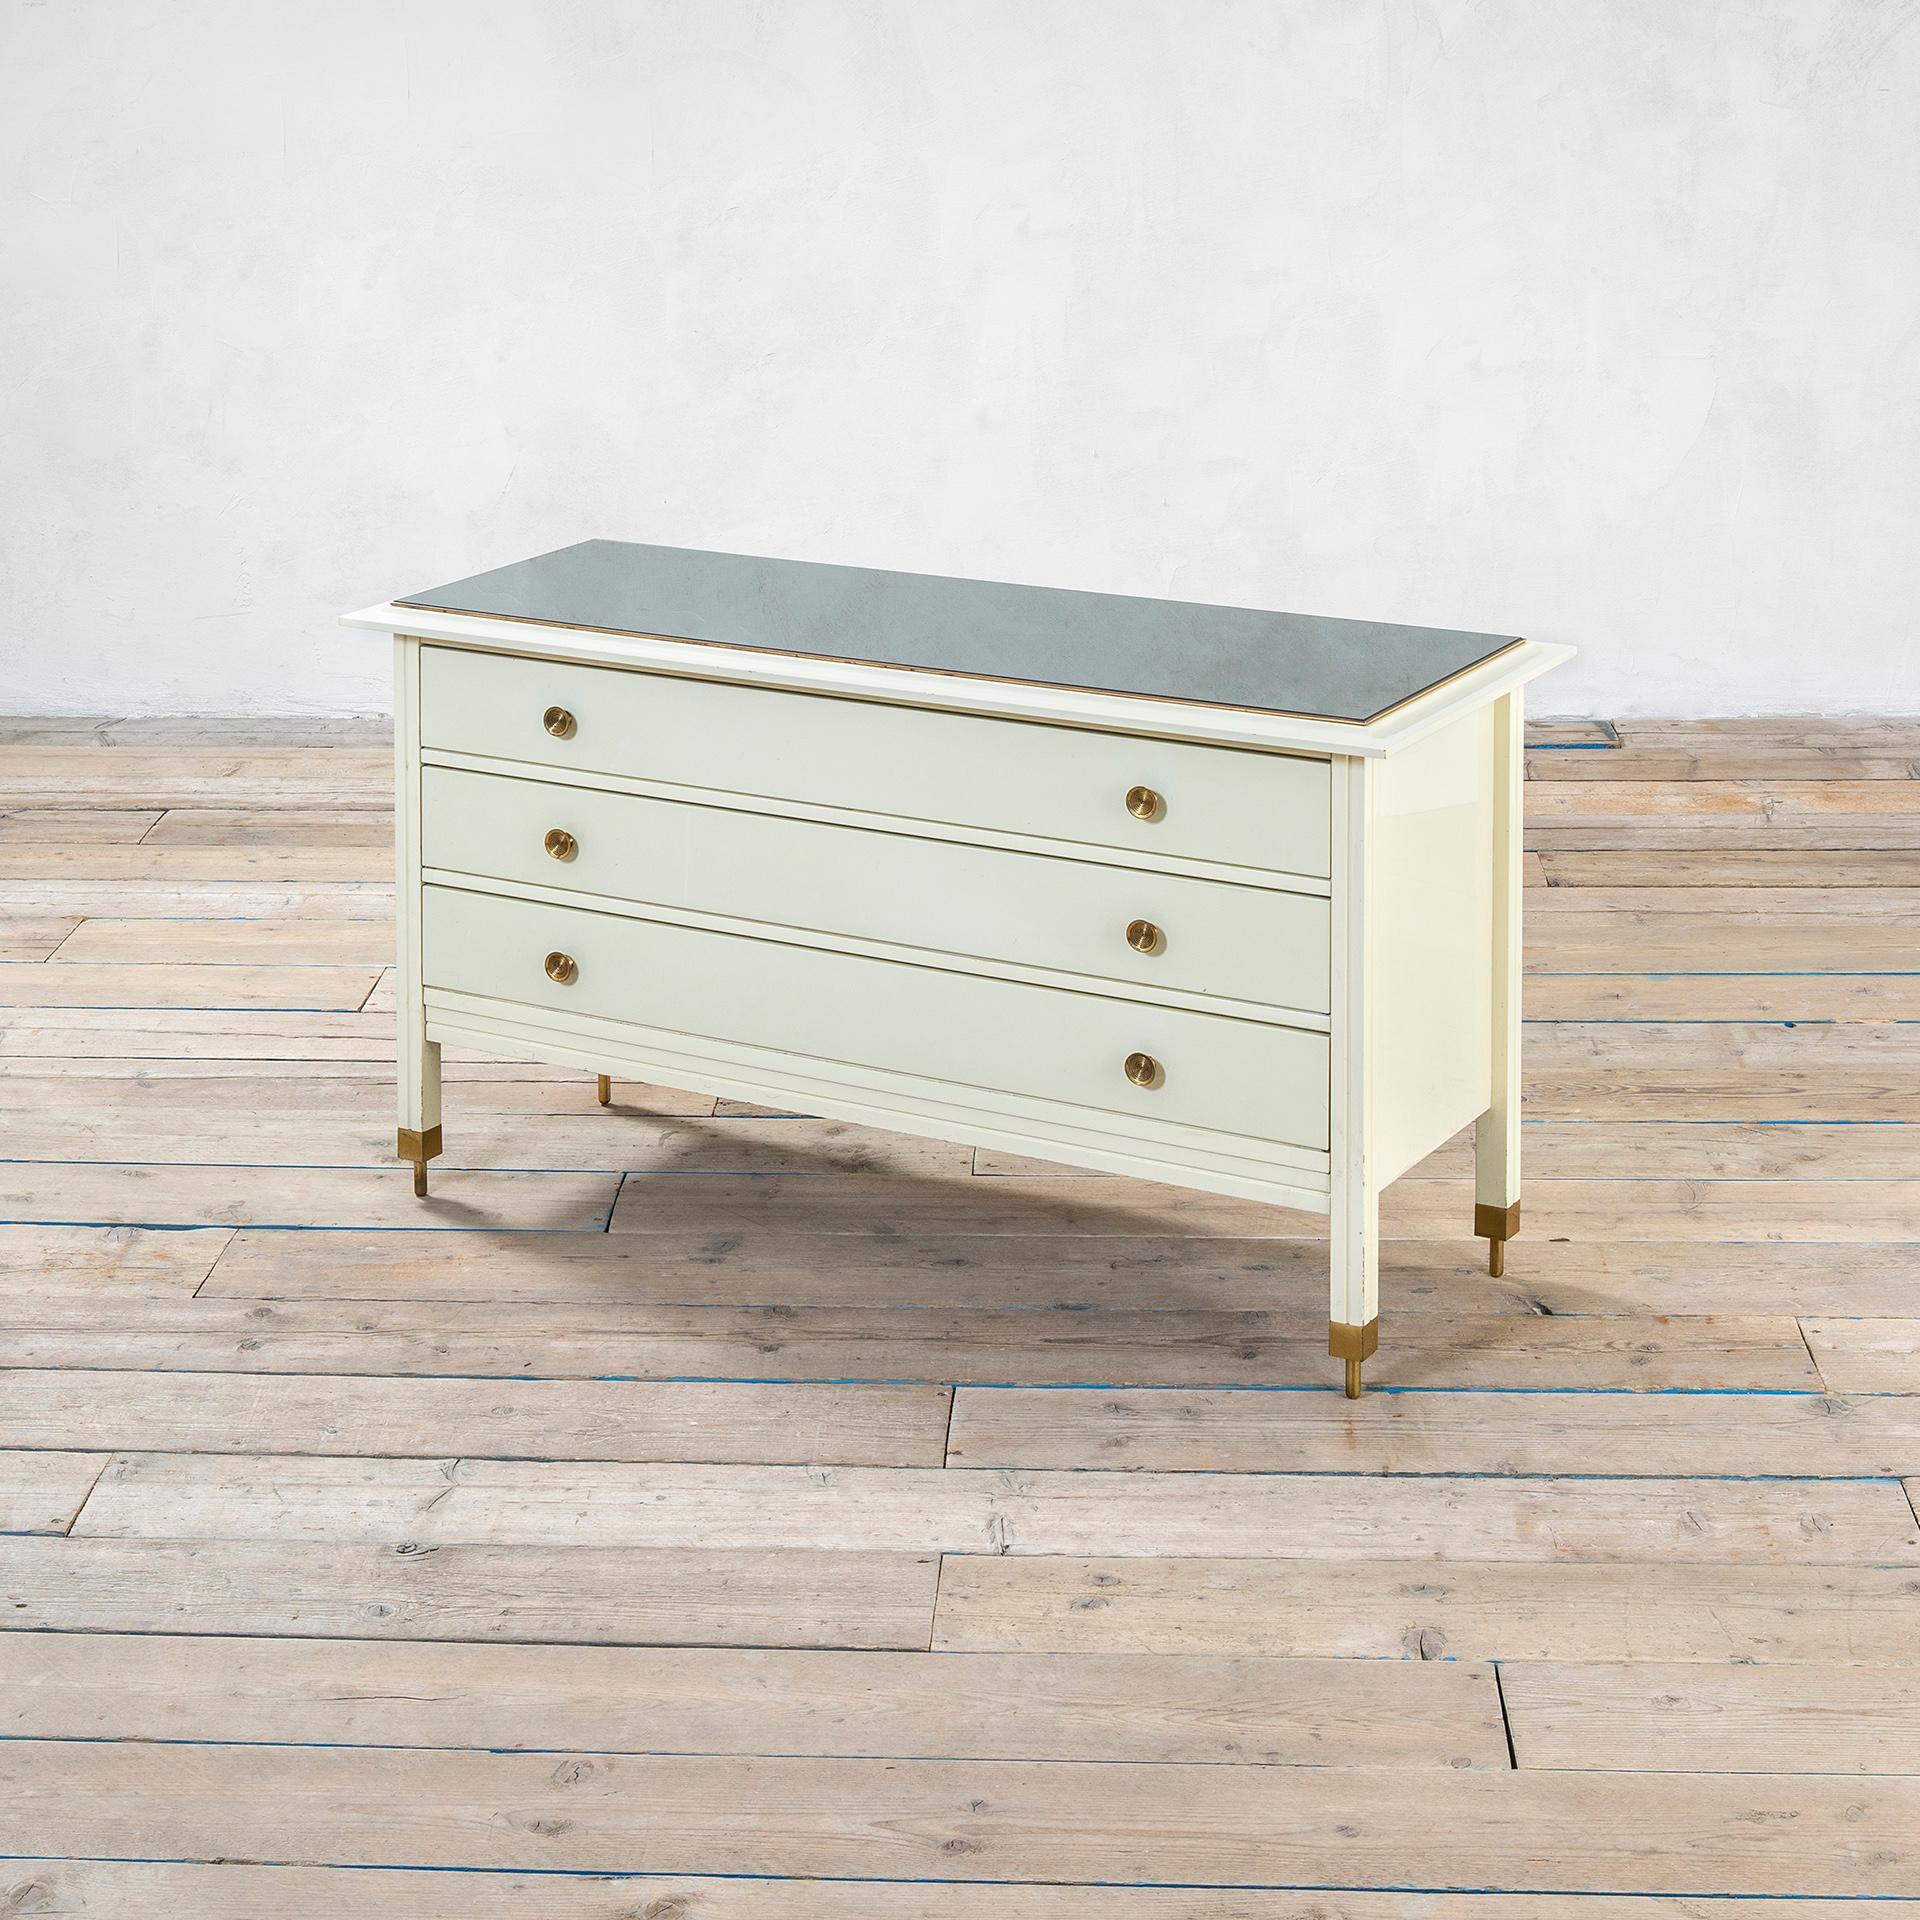 Chest of drawers (three drawers) designed by Carlo De Carli in '60s for Sormani Production. The structure is in white lacquered wood, the top is covered by a mirrored glass; the most peculiar detail is on the feet of this table, infact each foot is